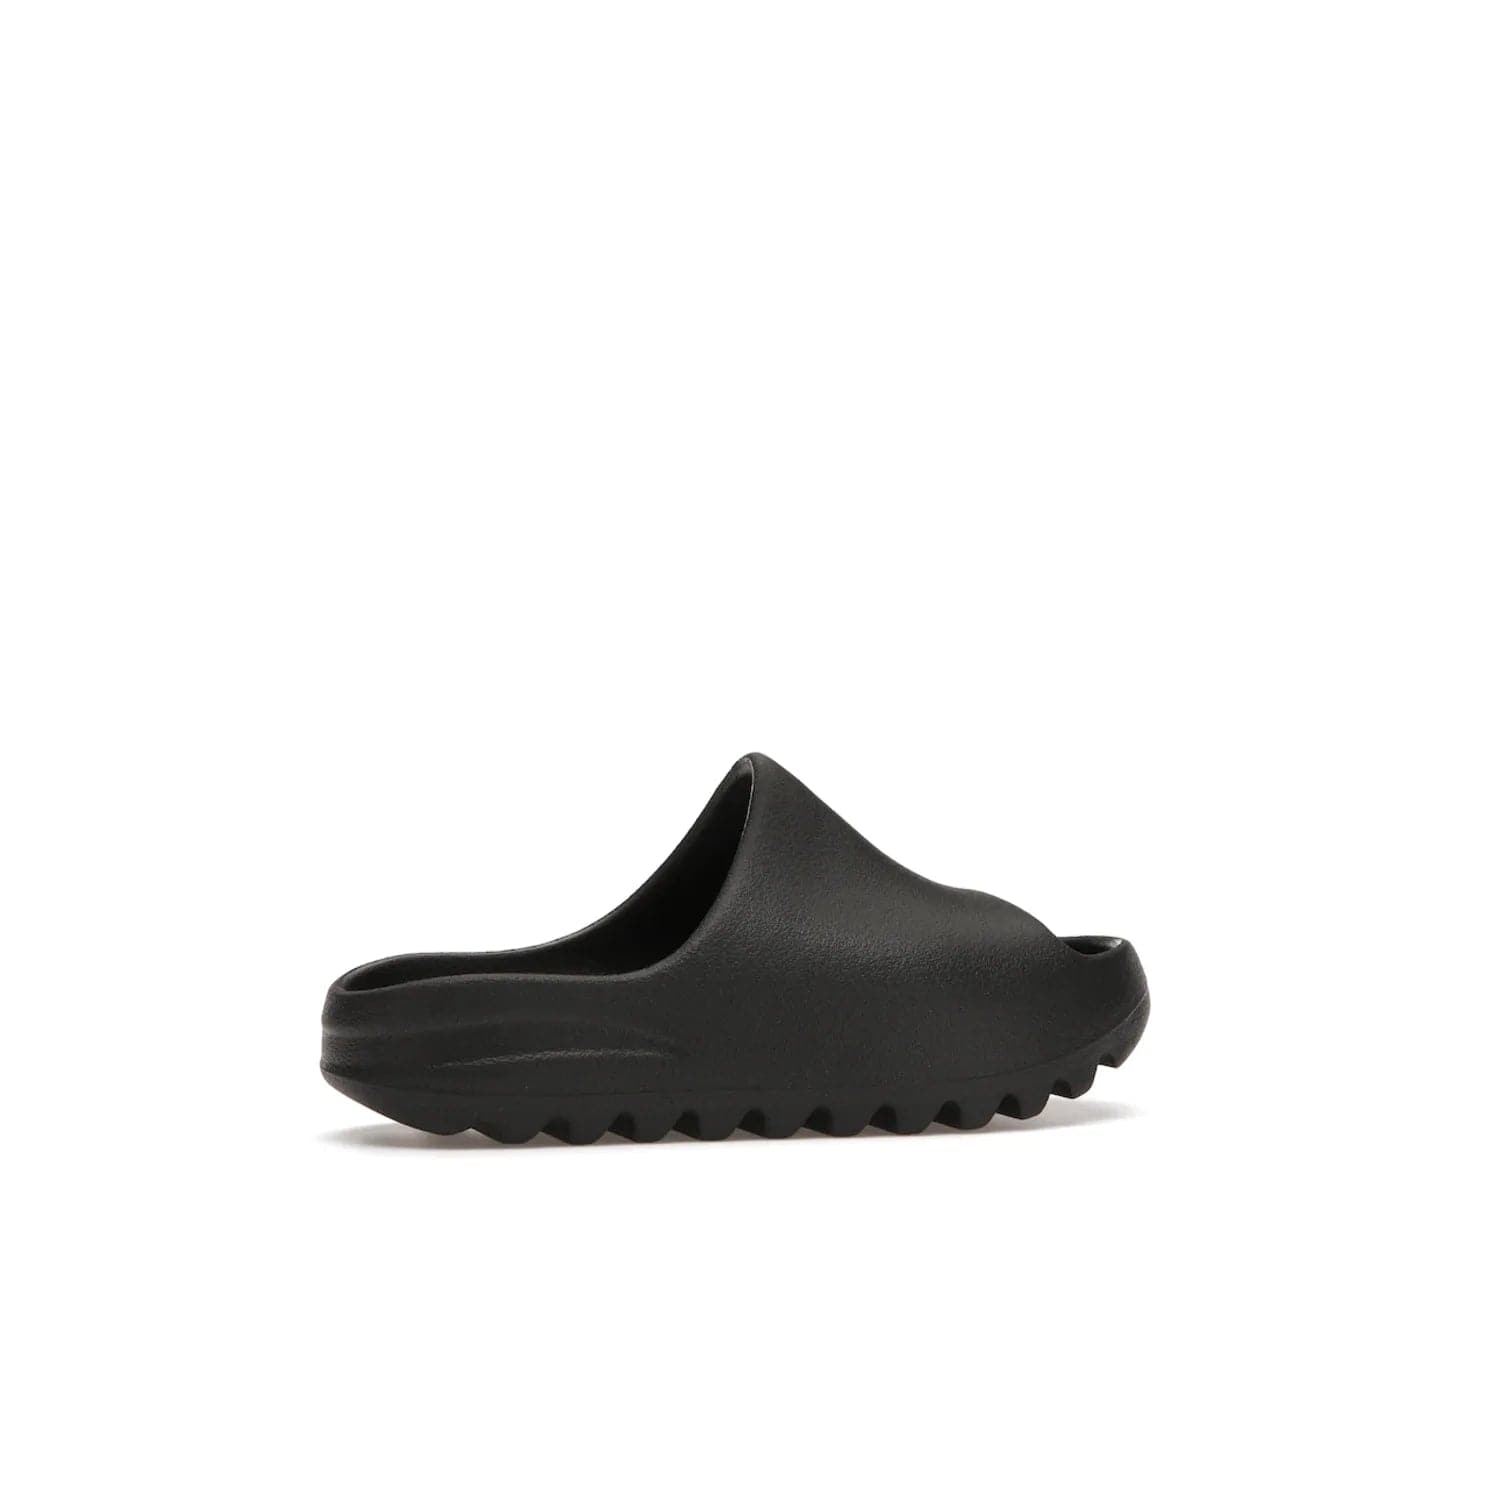 adidas Yeezy Slide Onyx (Kids) - Image 35 - Only at www.BallersClubKickz.com - adidas Yeezy Slide Onyx (Kids): Comfortable foam construction with textured surface and iconic three-stripe logo. Breathable, open-toe design and deep grooves for traction. Released in March 2021 at $50.